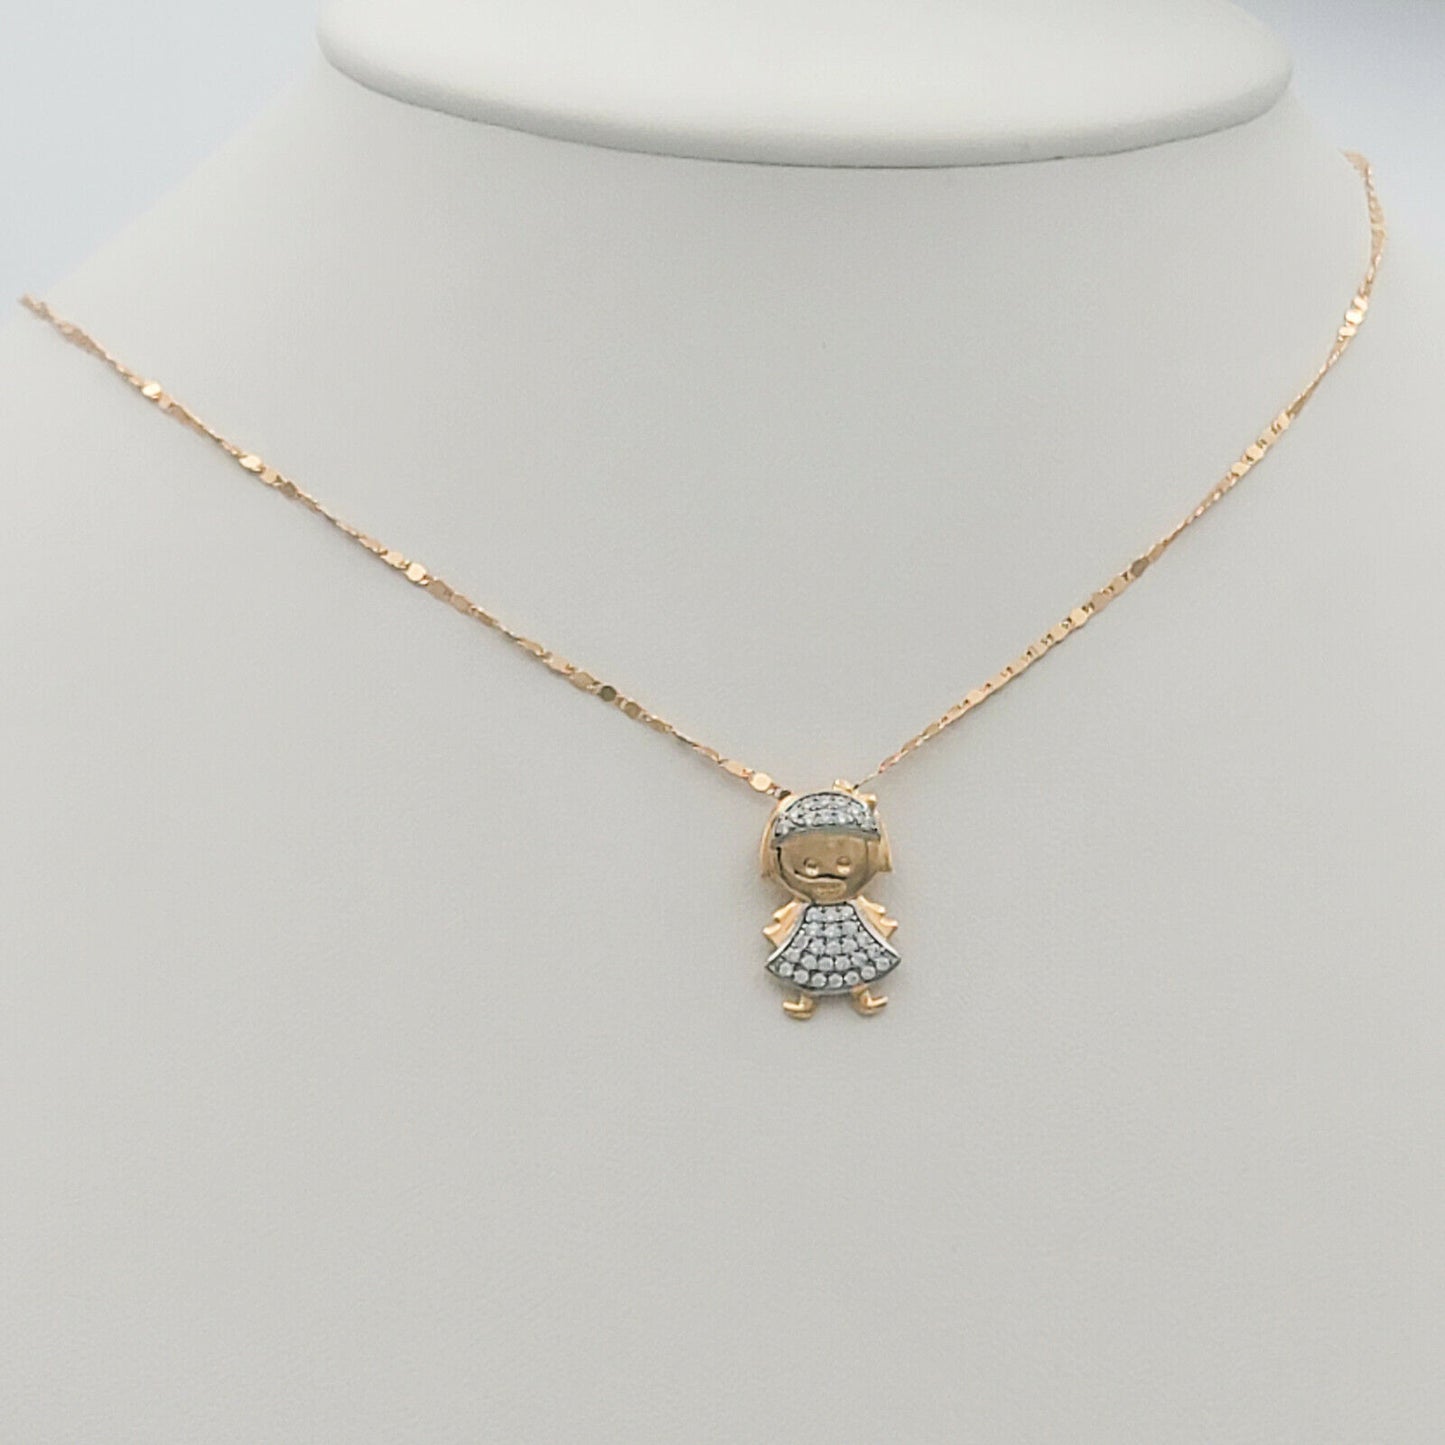 Necklaces - 18K Gold Plated. Love My Little Girl CZ Pendant & Chain. Family